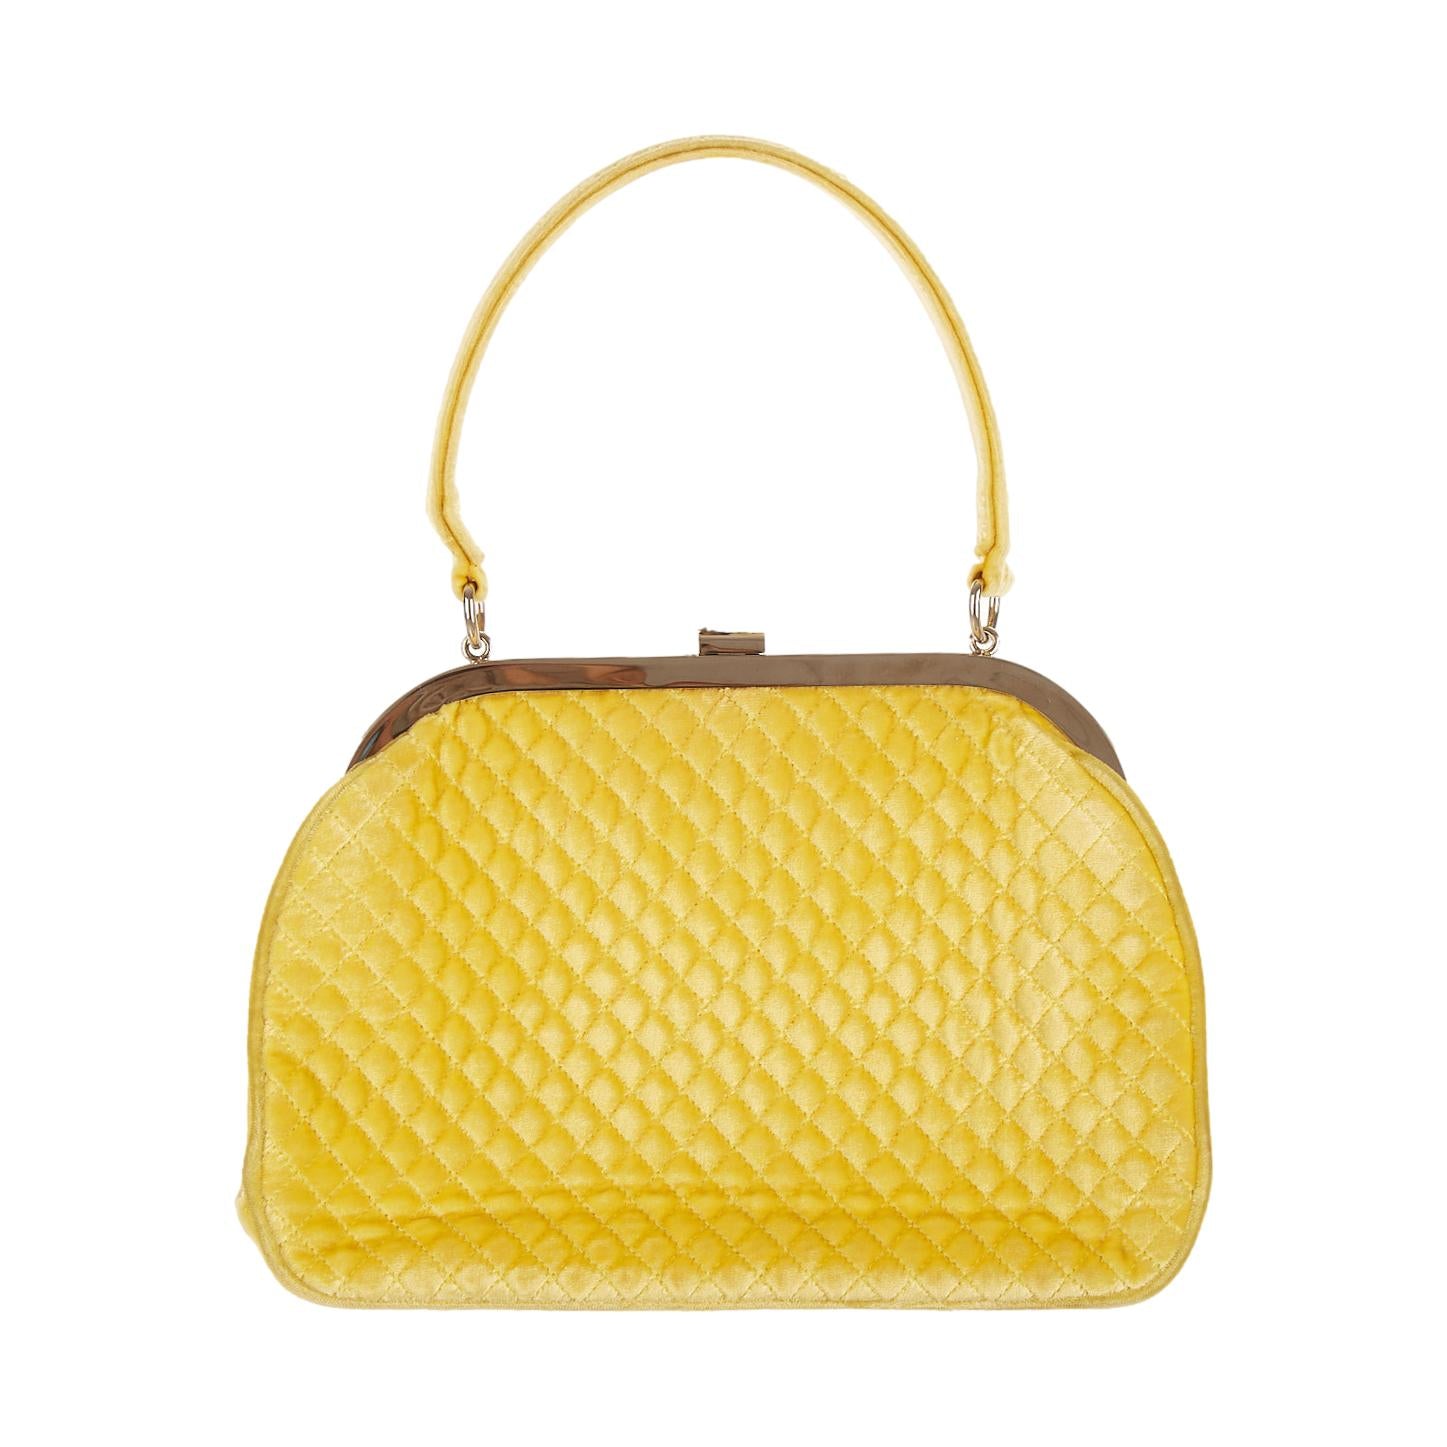 Chanel Yellow Velour Quilted Top Handle Bag